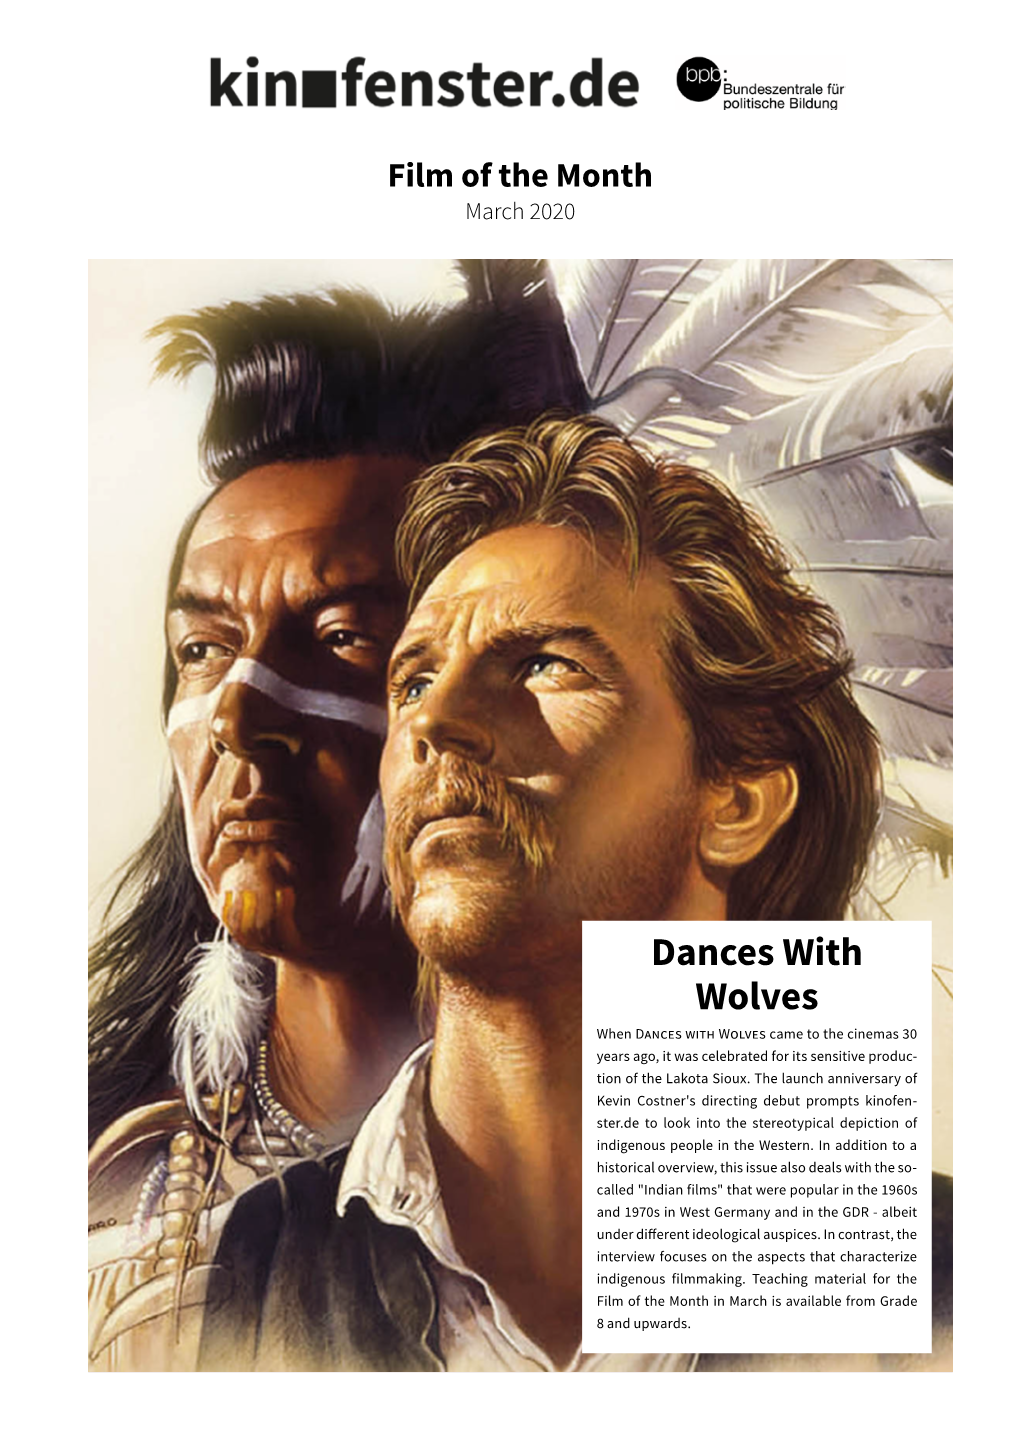 Dances with Wolves When Dances with Wolves Came to the Cinemas 30 Years Ago, It Was Celebrated for Its Sensitive Produc- Tion of the Lakota Sioux